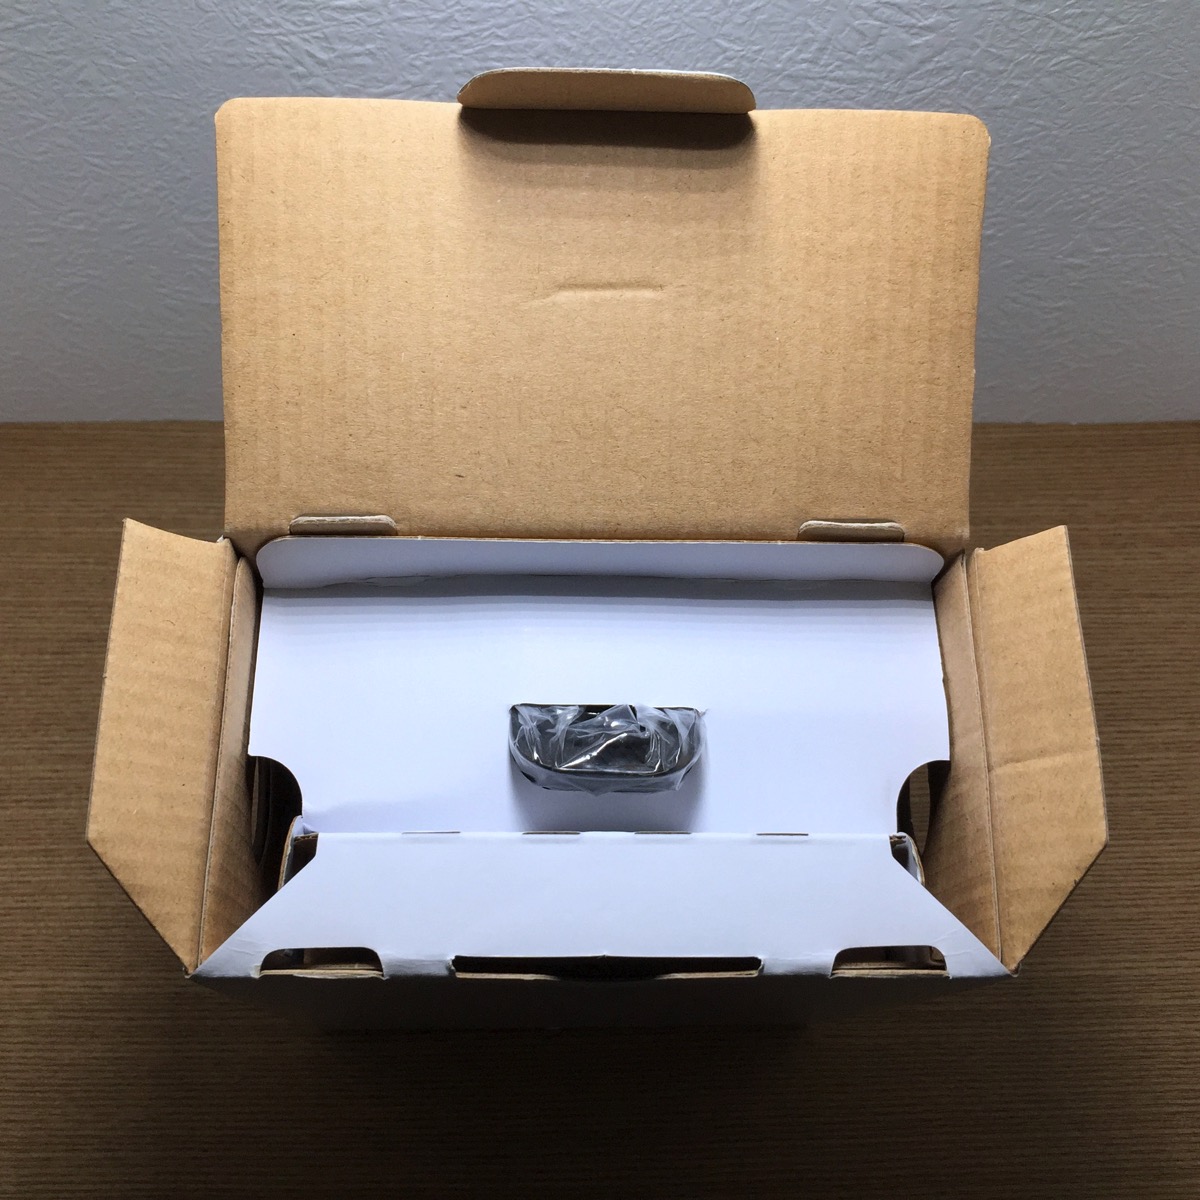 Griffin WatchStand Charging Dock - Opened Packaging